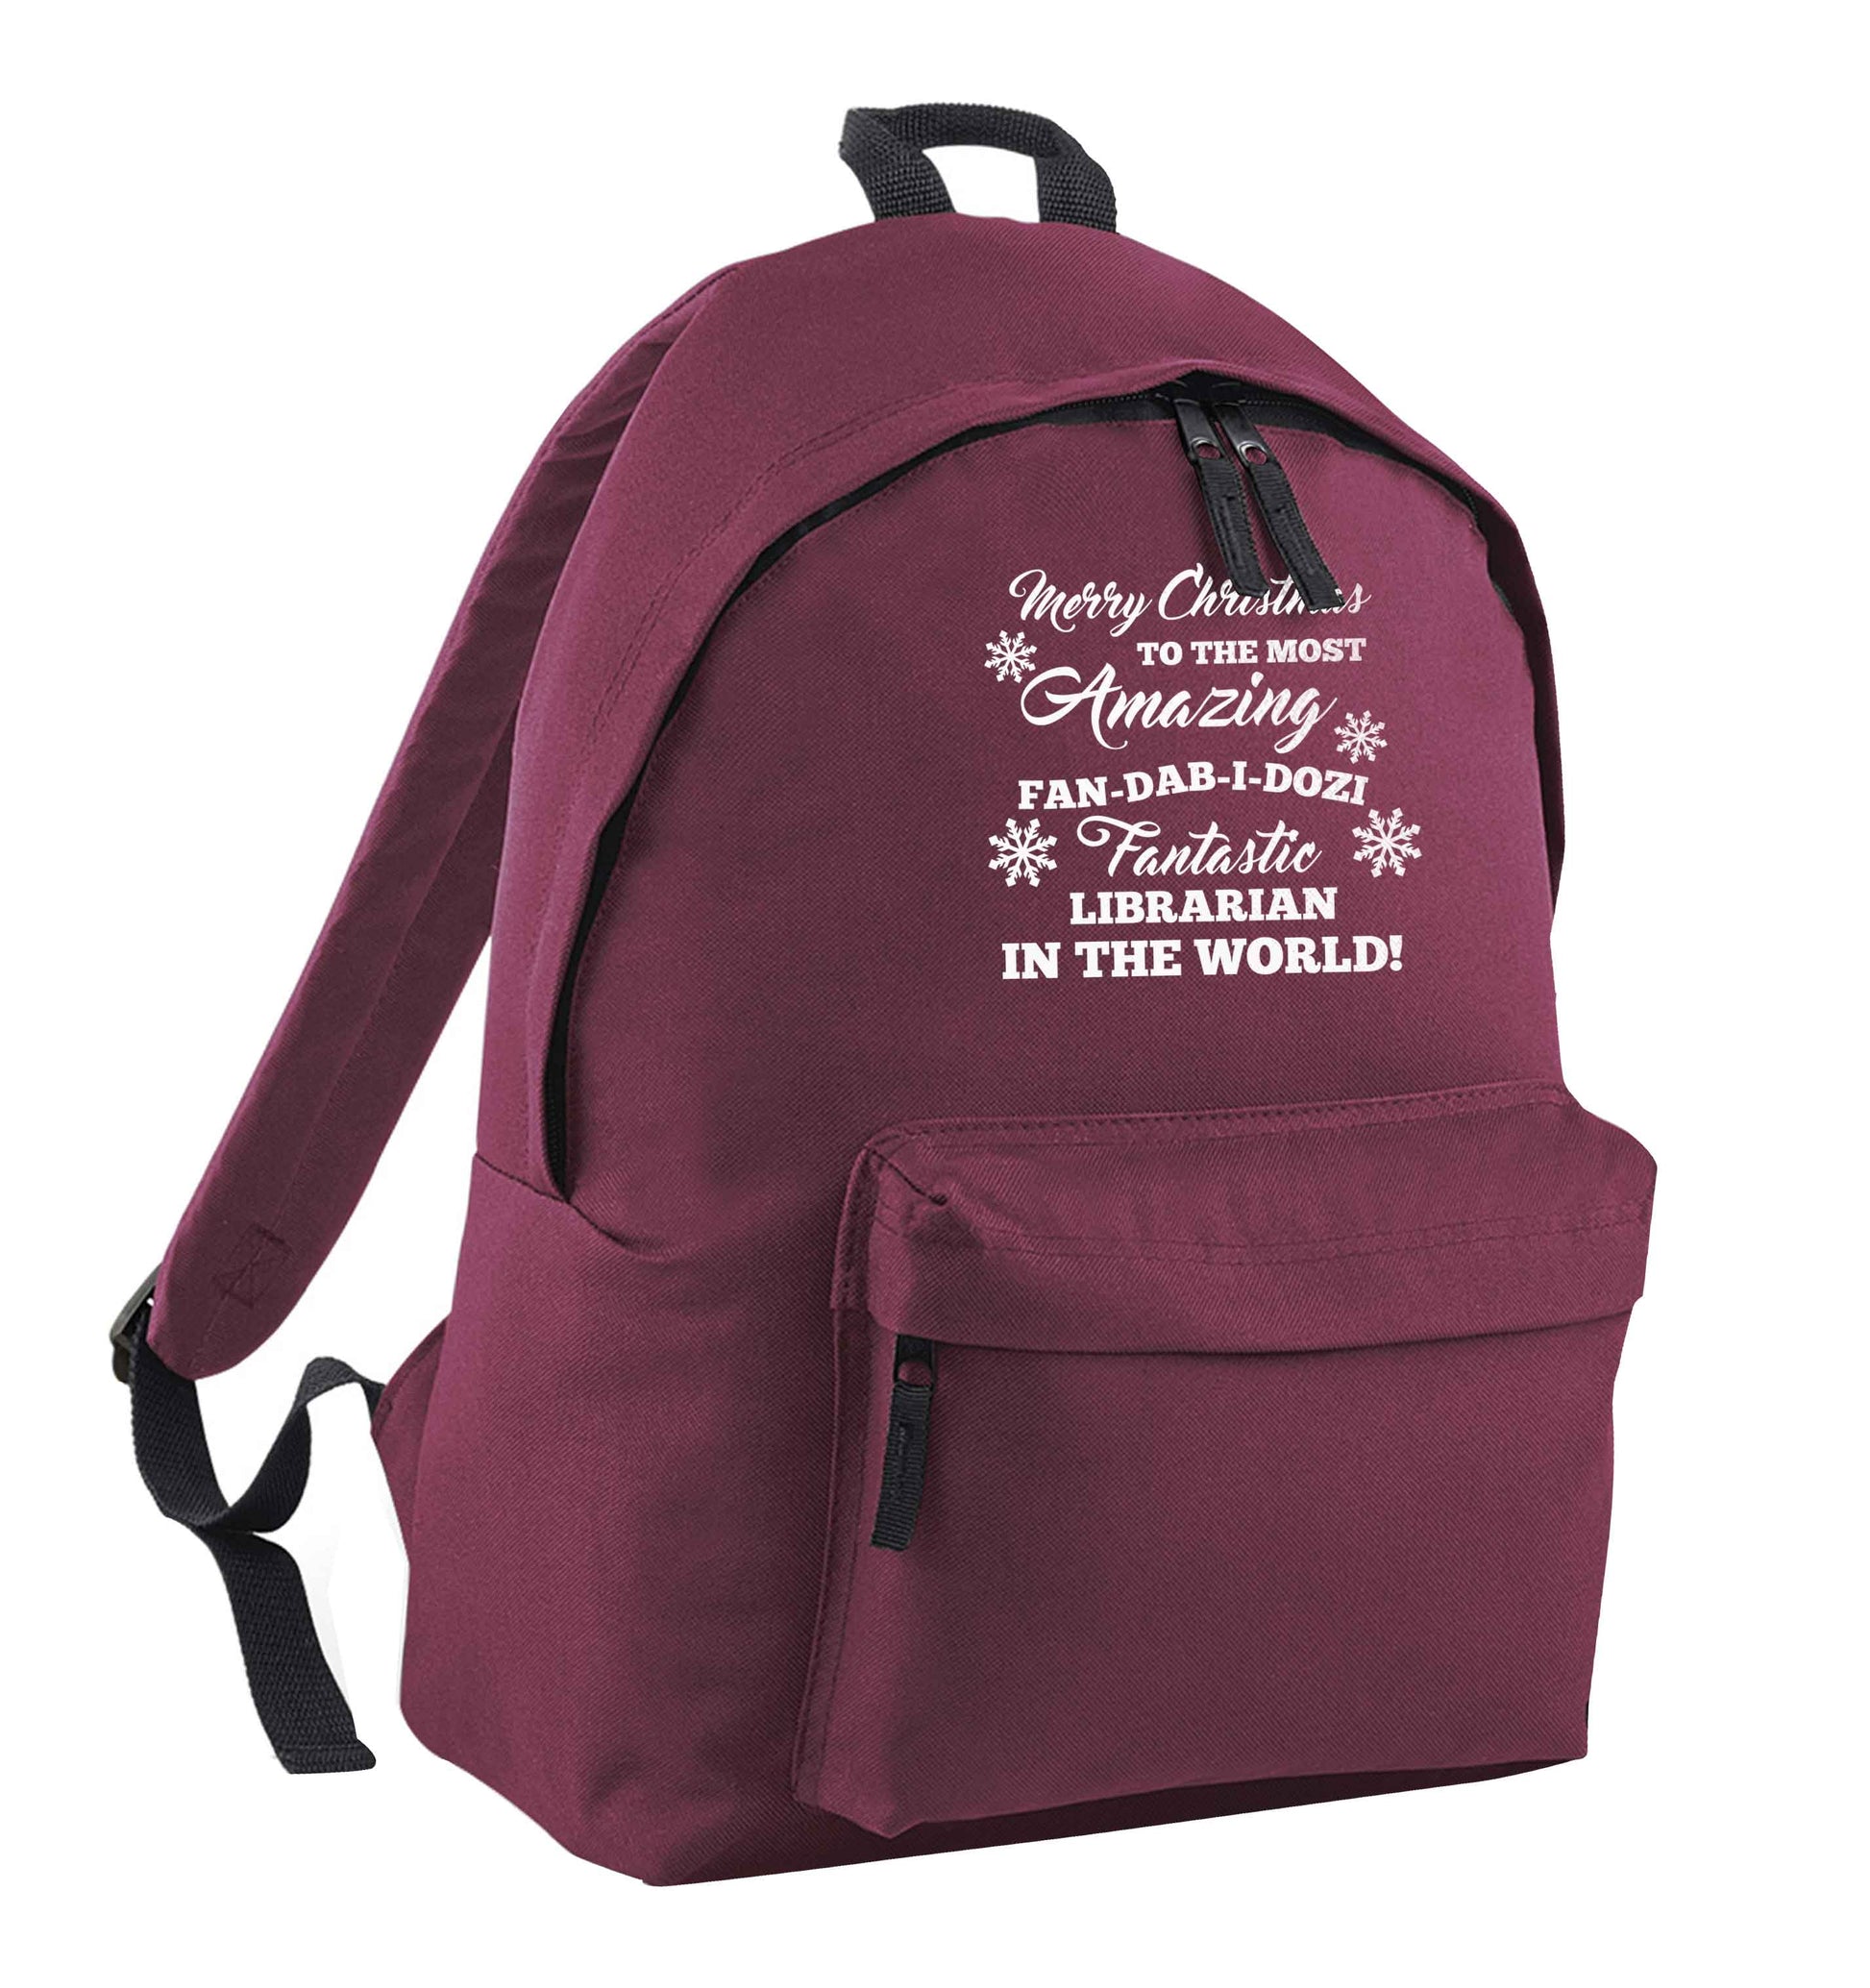 Merry Christmas to the most amazing librarian in the world! maroon adults backpack